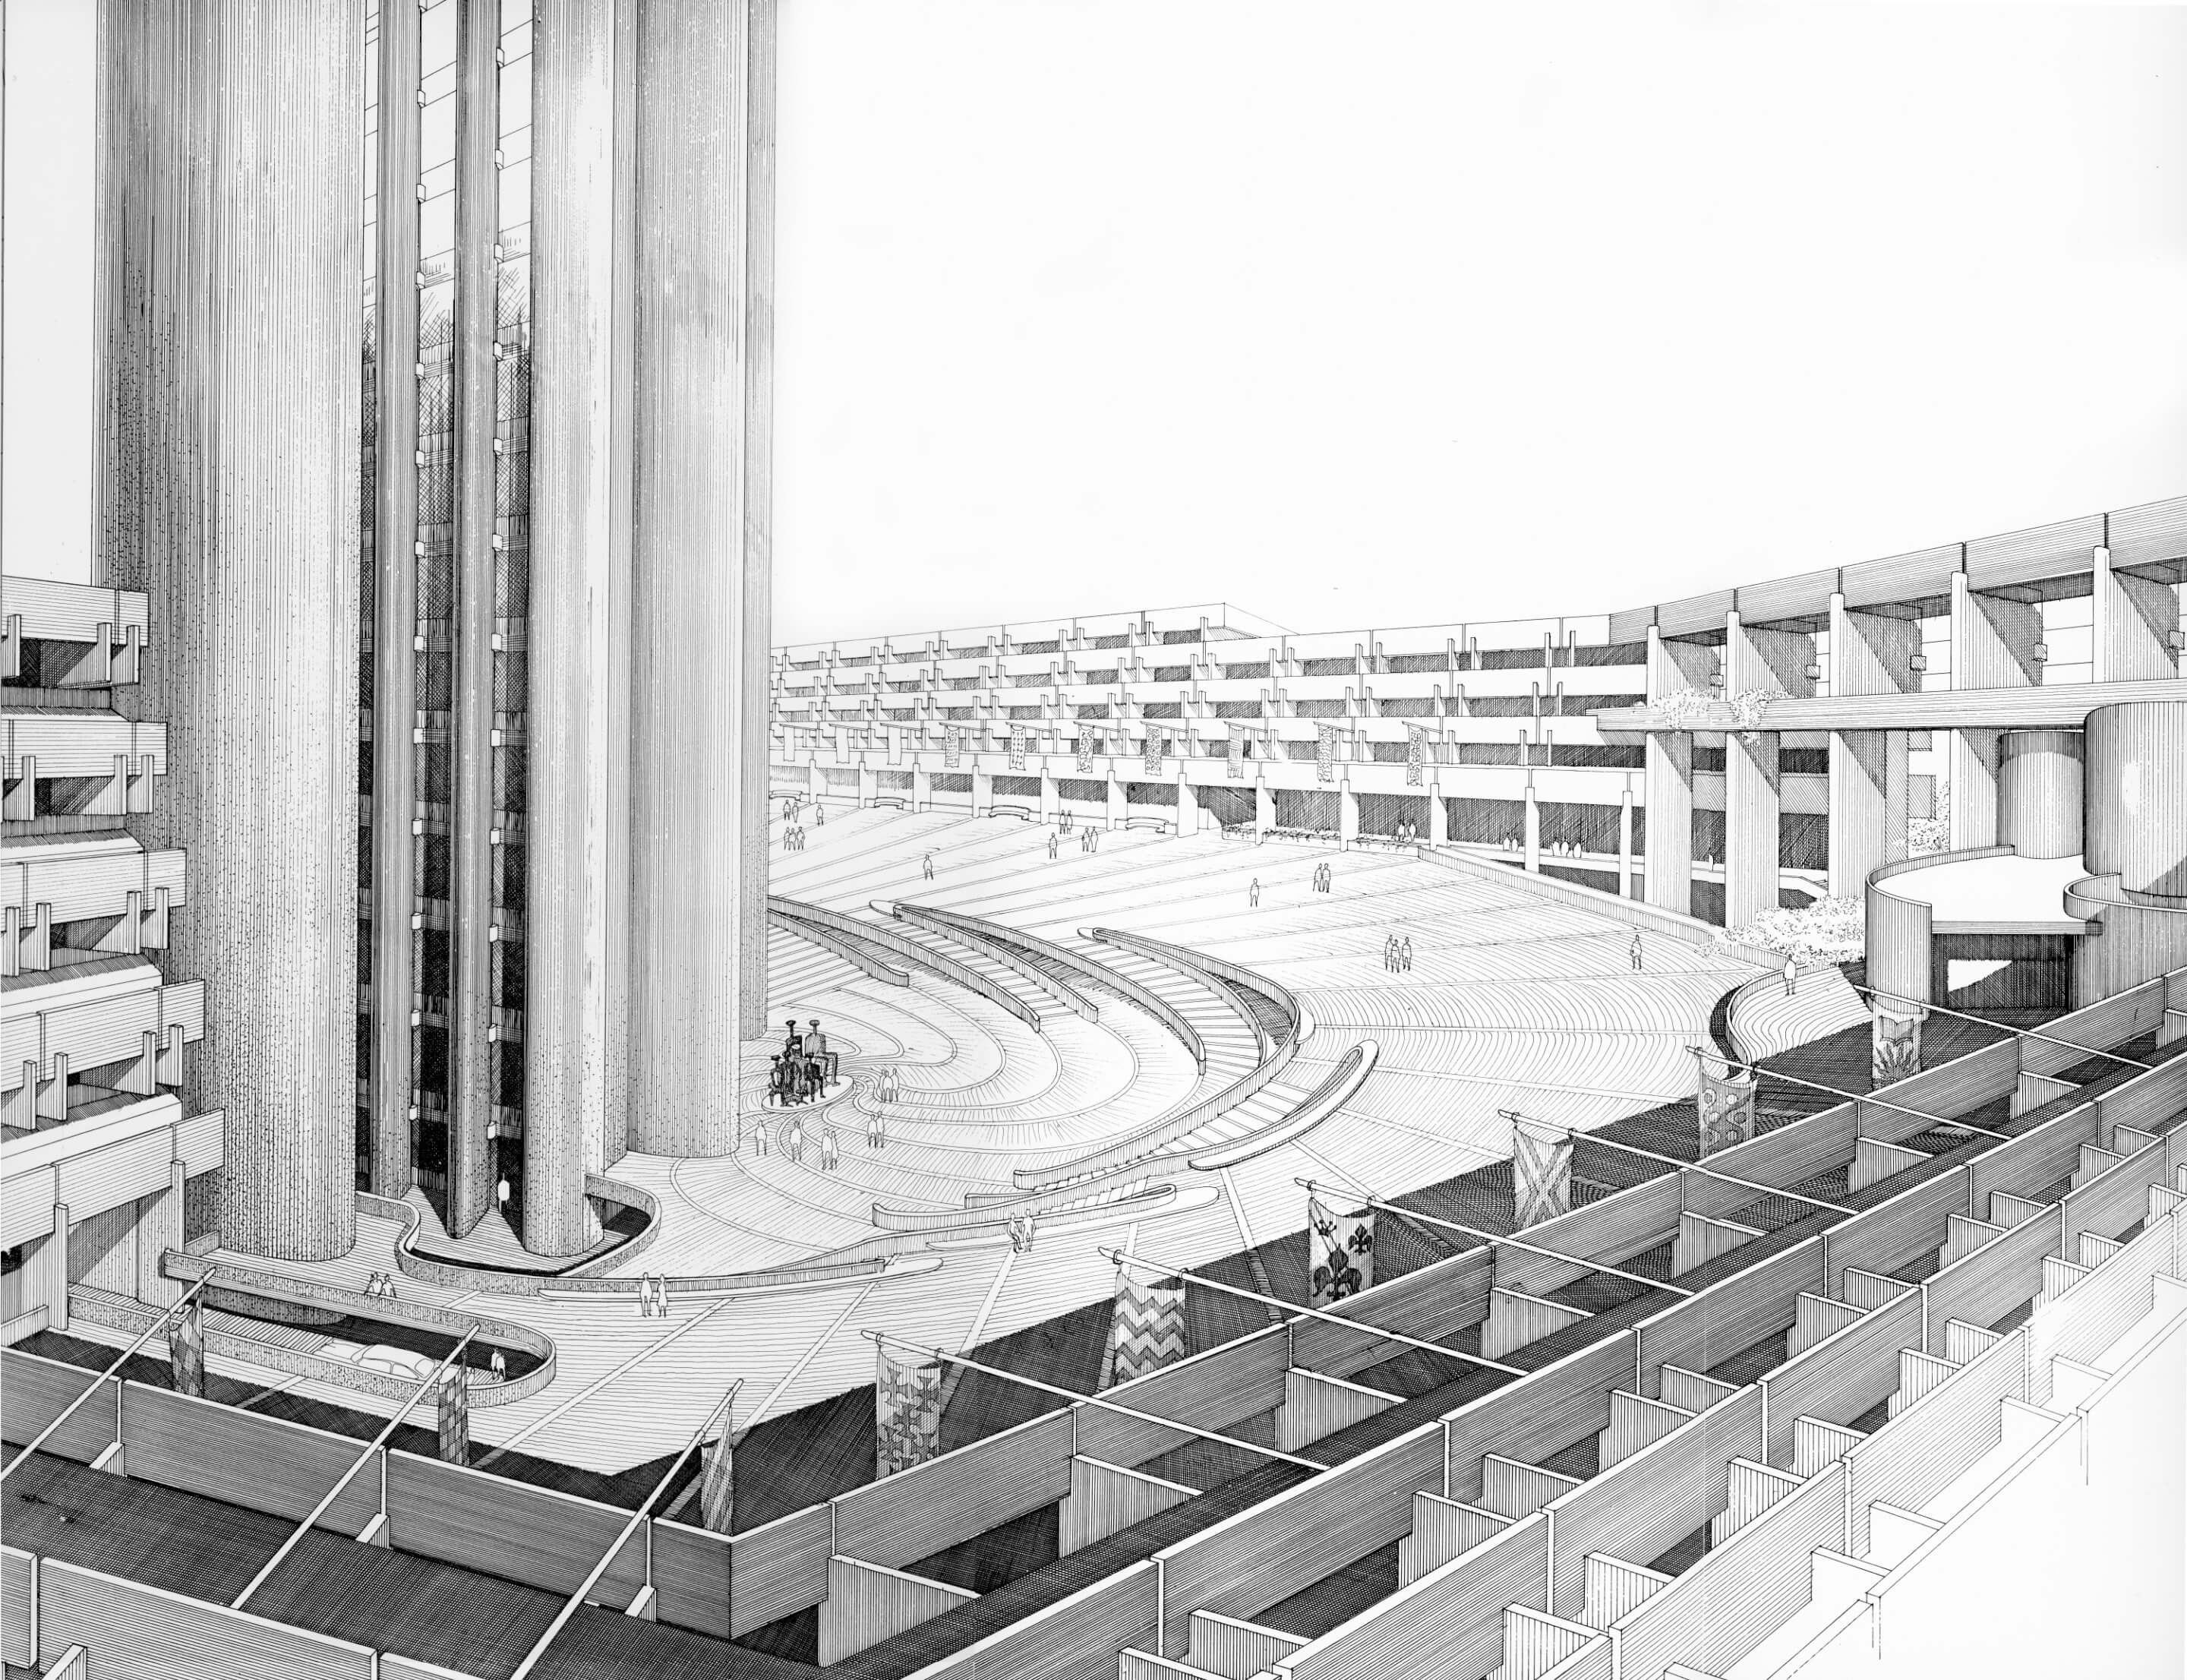 A black and white drawing of the Government Services Center in Boston